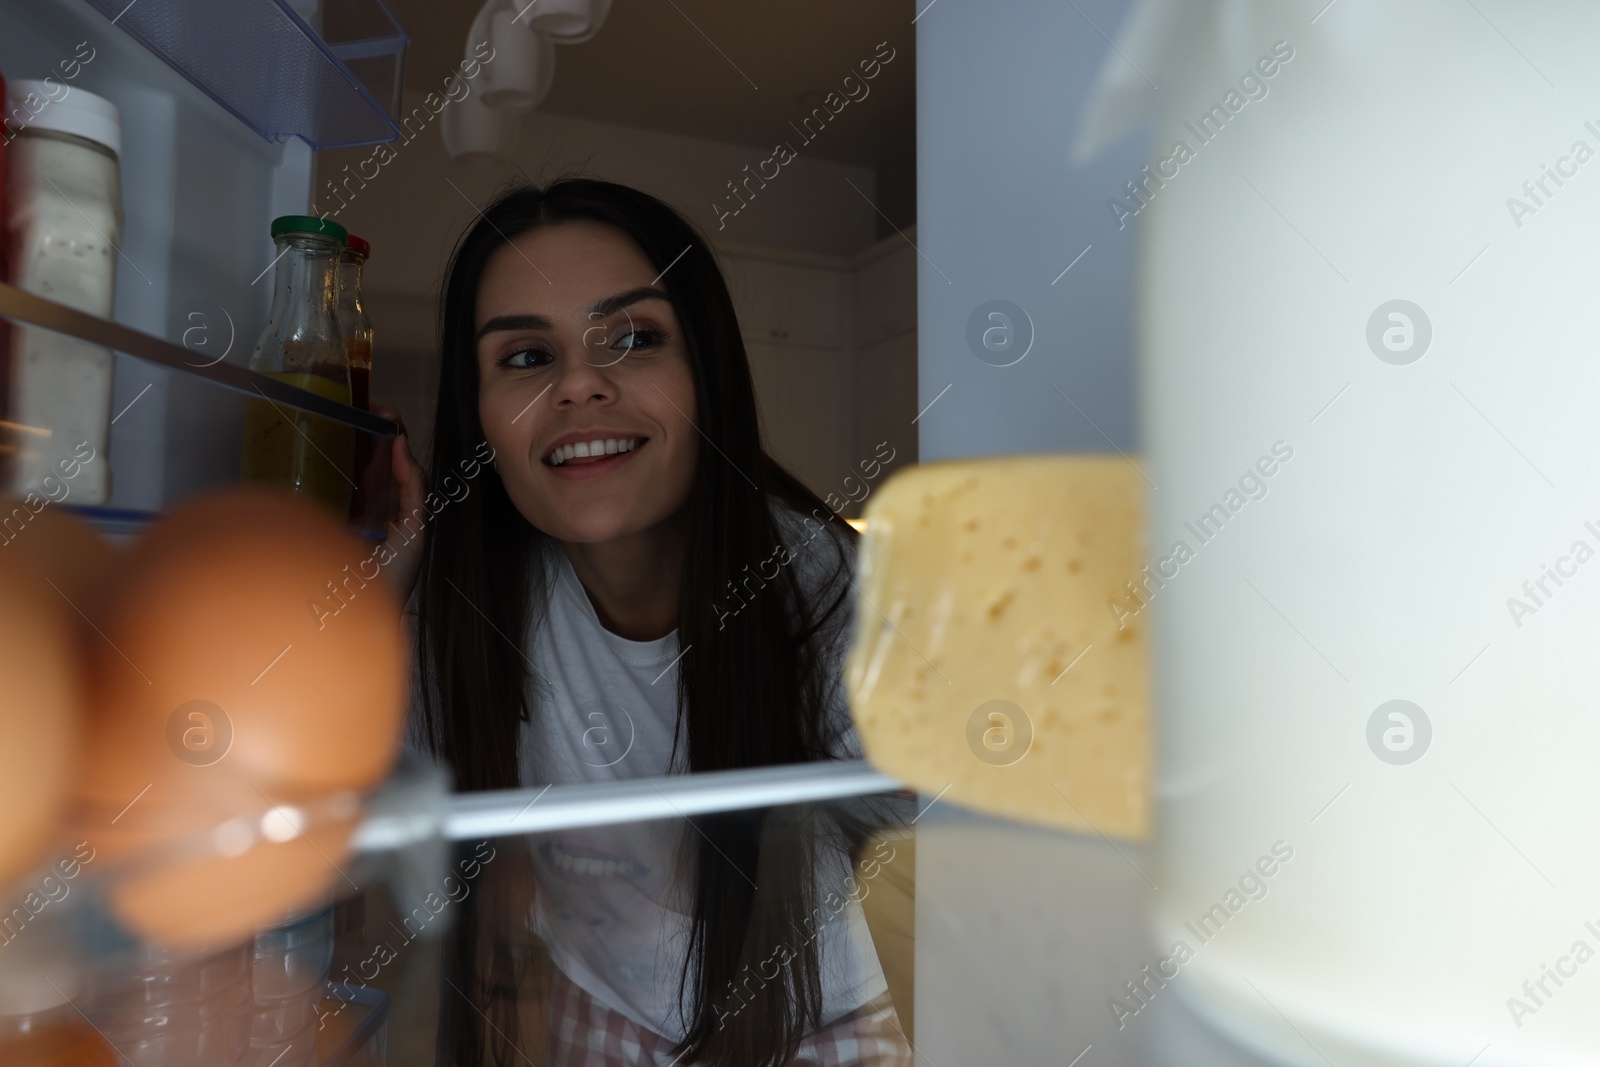 Photo of Young woman near modern refrigerator in kitchen at night, view from inside